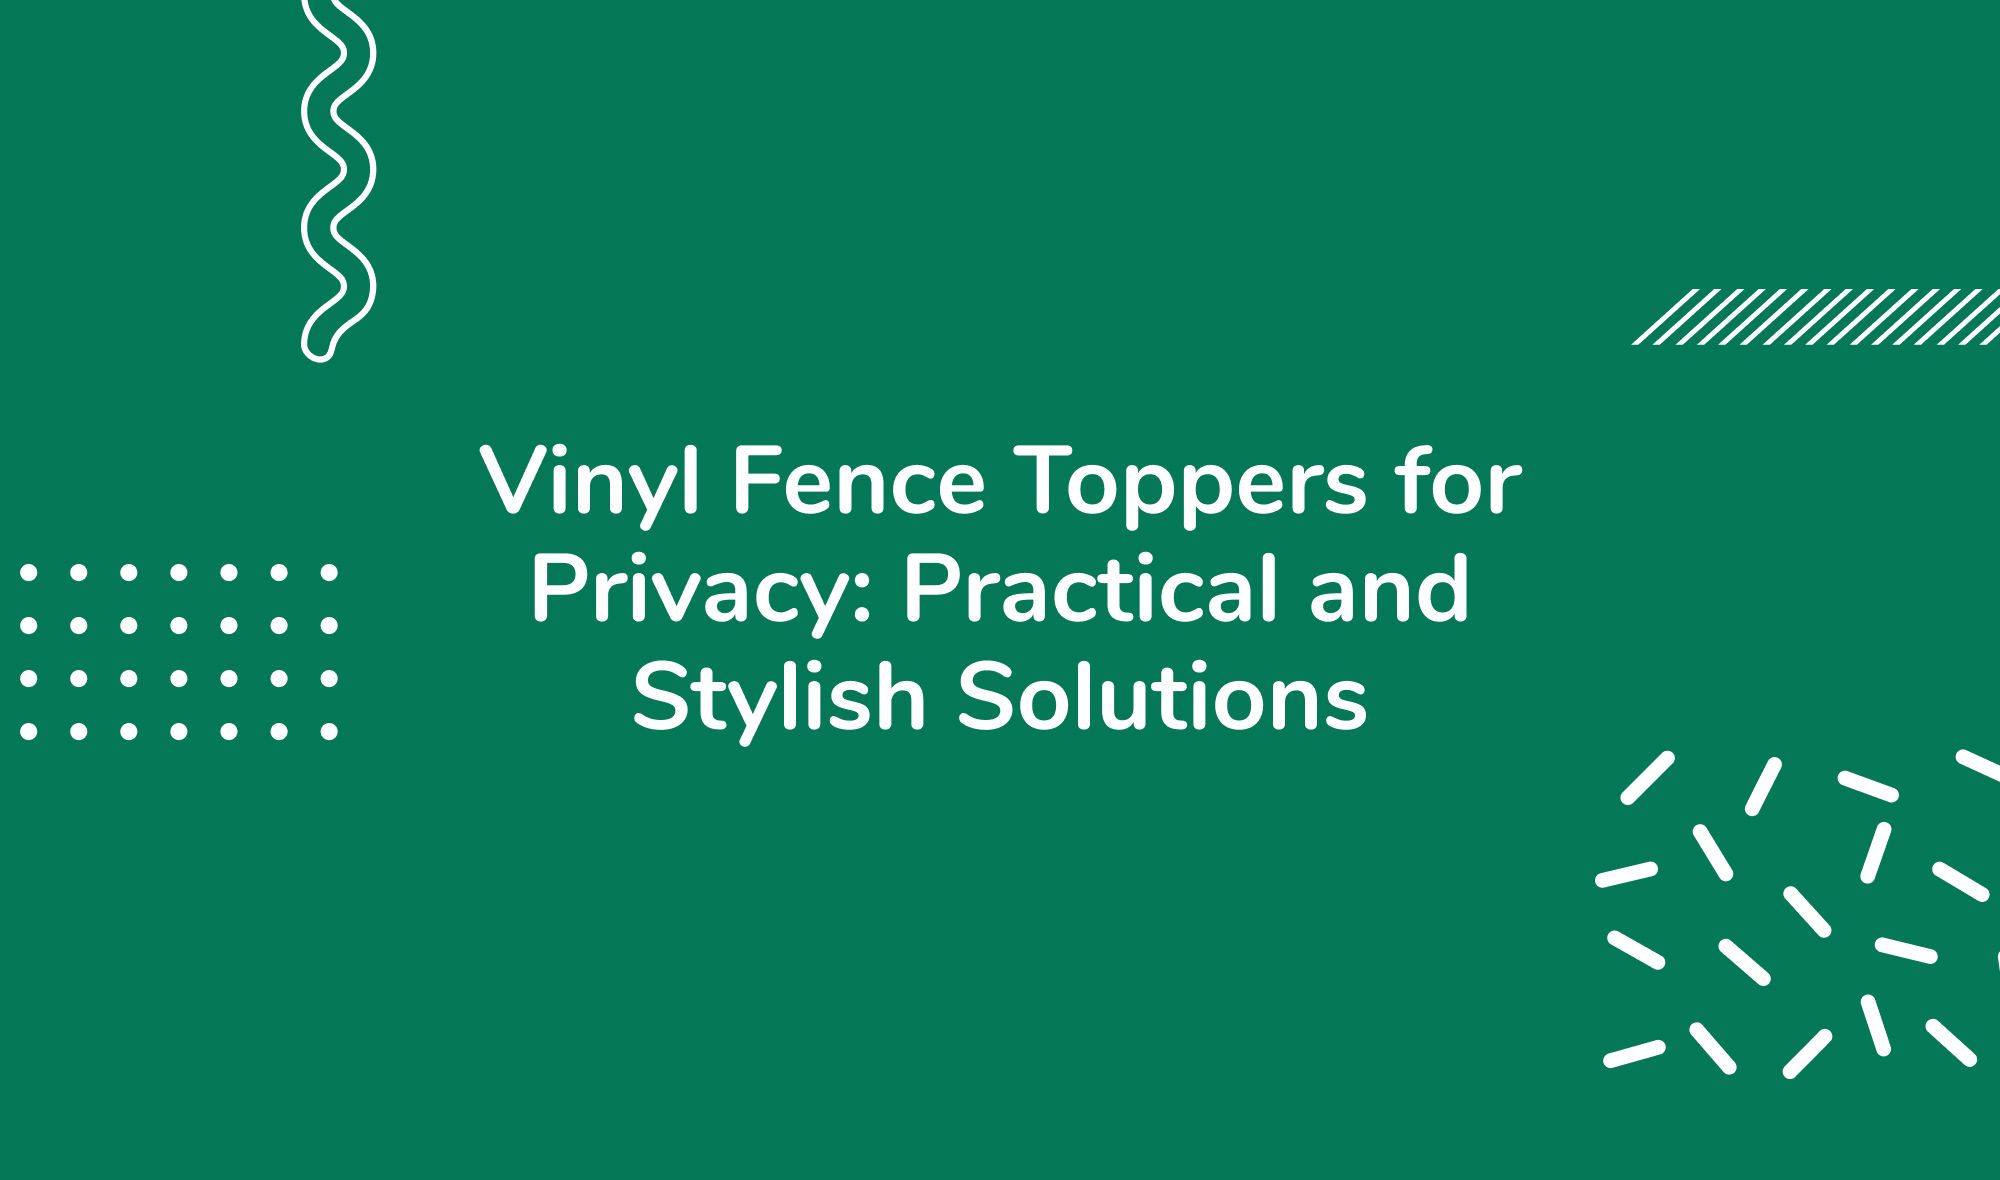 Vinyl Fence Toppers for Privacy: Practical and Stylish Solutions